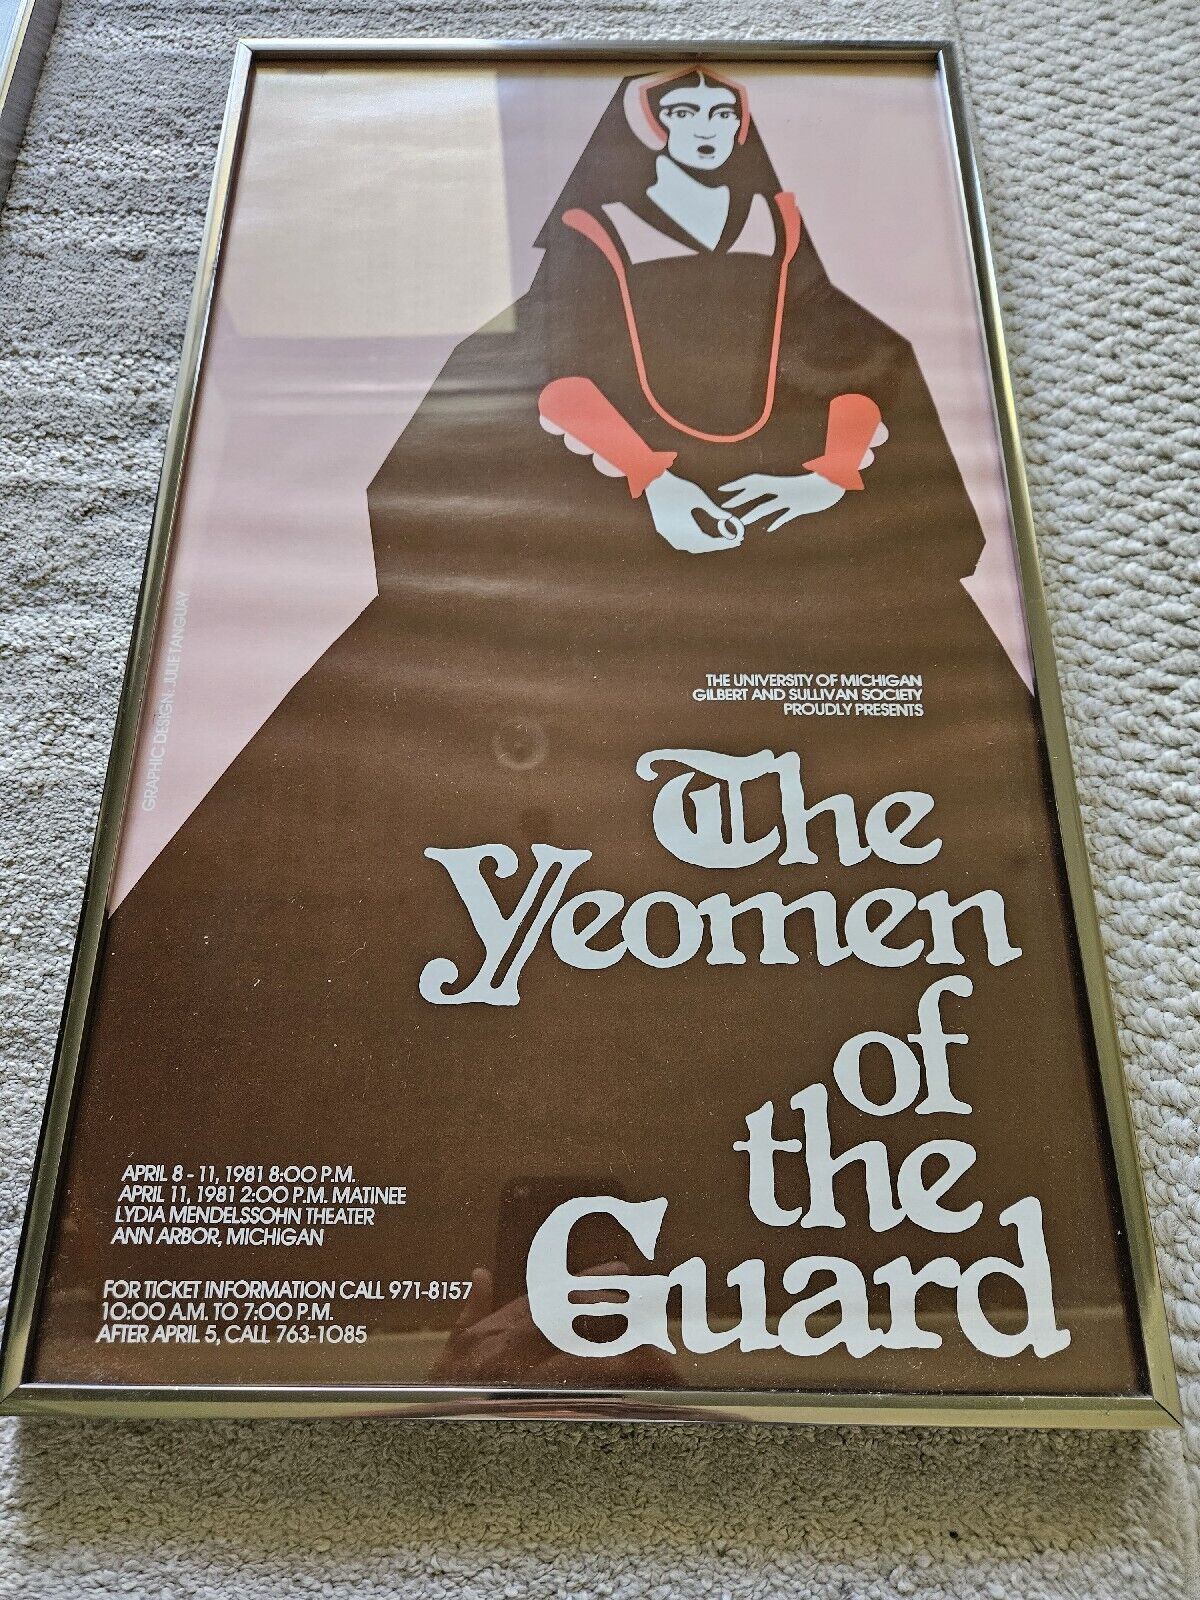 University Of Michigan Theater The Yeomen Of The Guard Poster 1981 Julie Tamguay